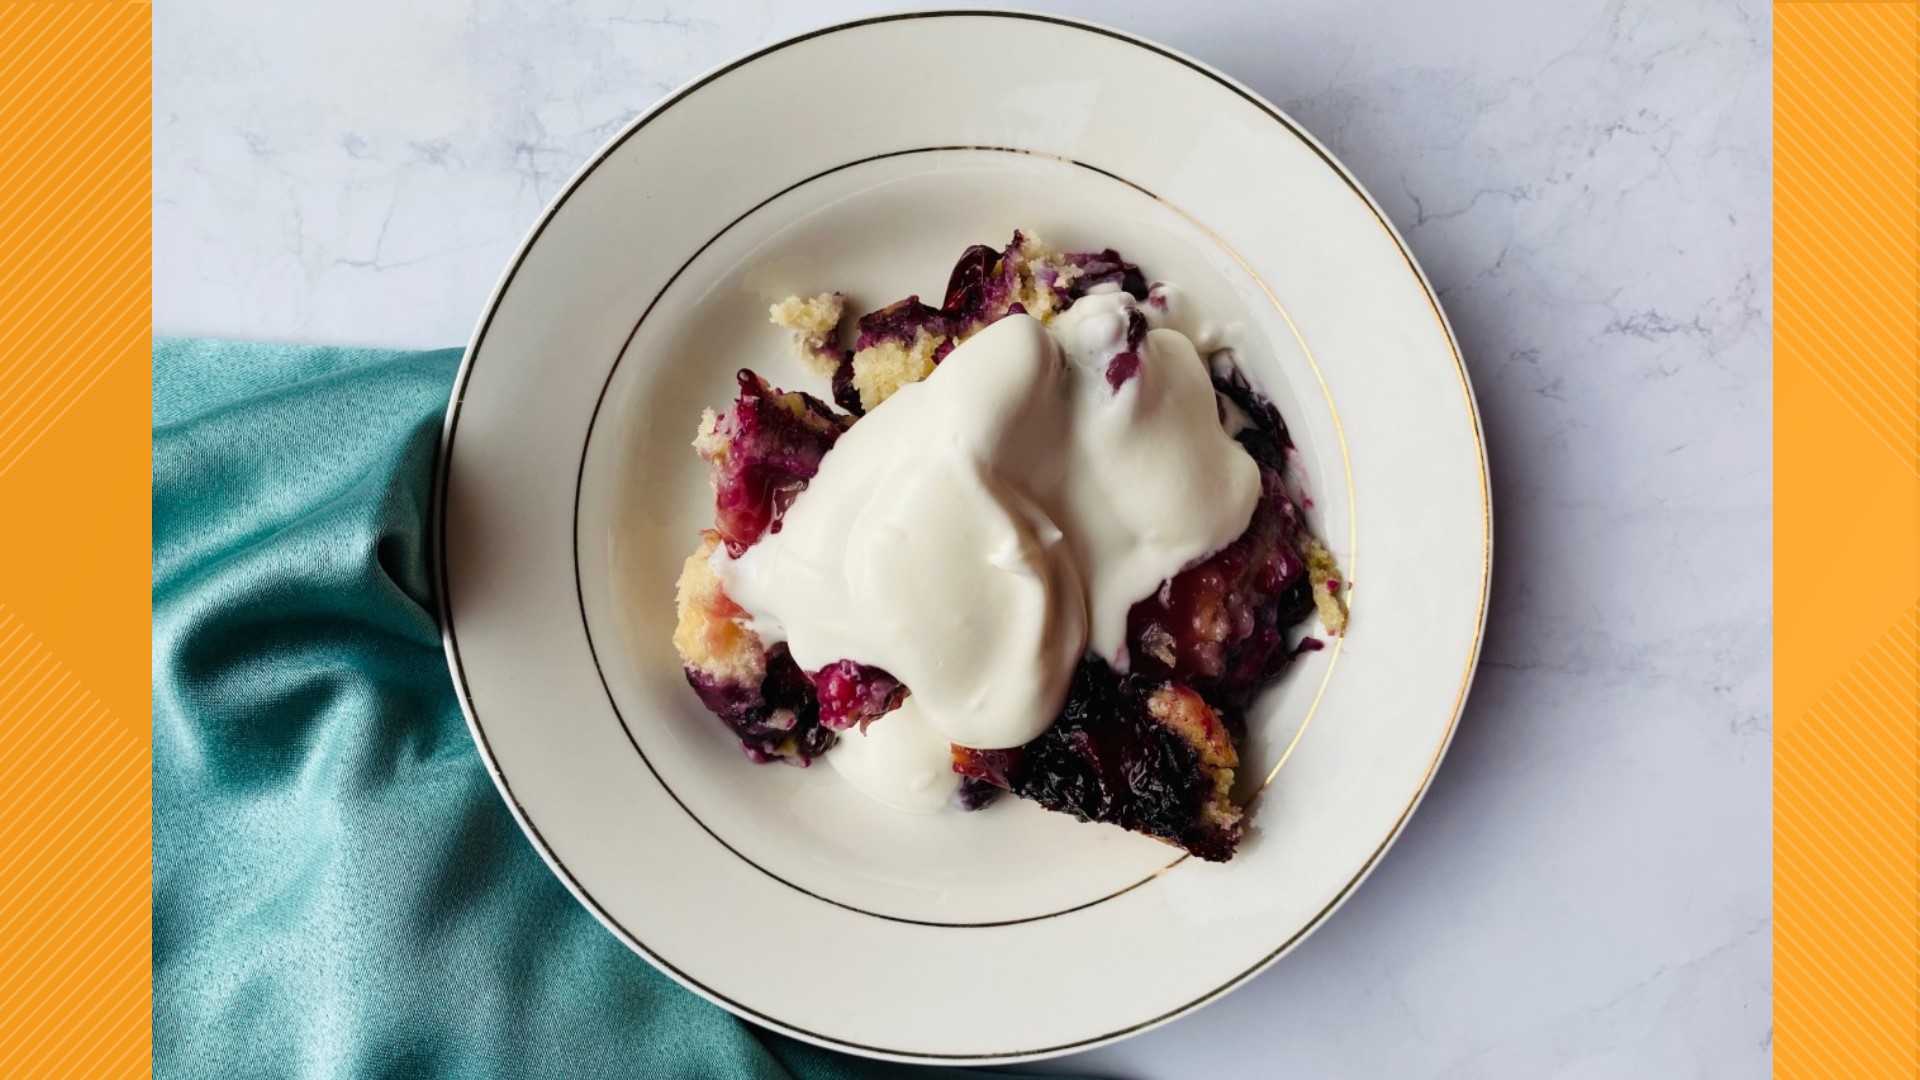 Since July belongs to blueberries, Chef Tanorria Askew decided to show us her take on blueberry cobbler.